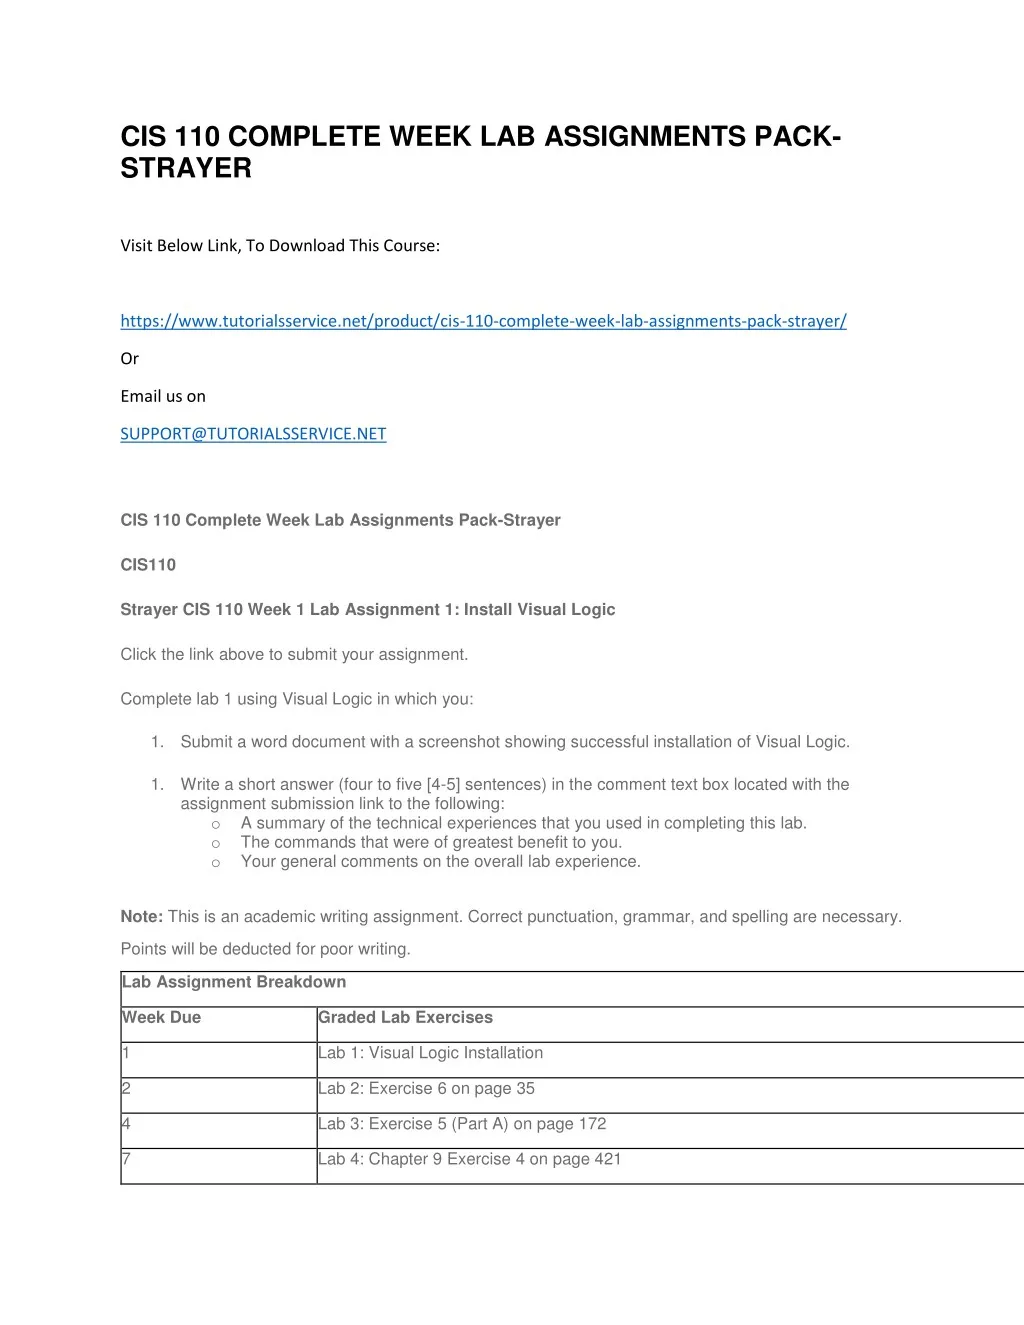 cis 110 complete week lab assignments pack strayer